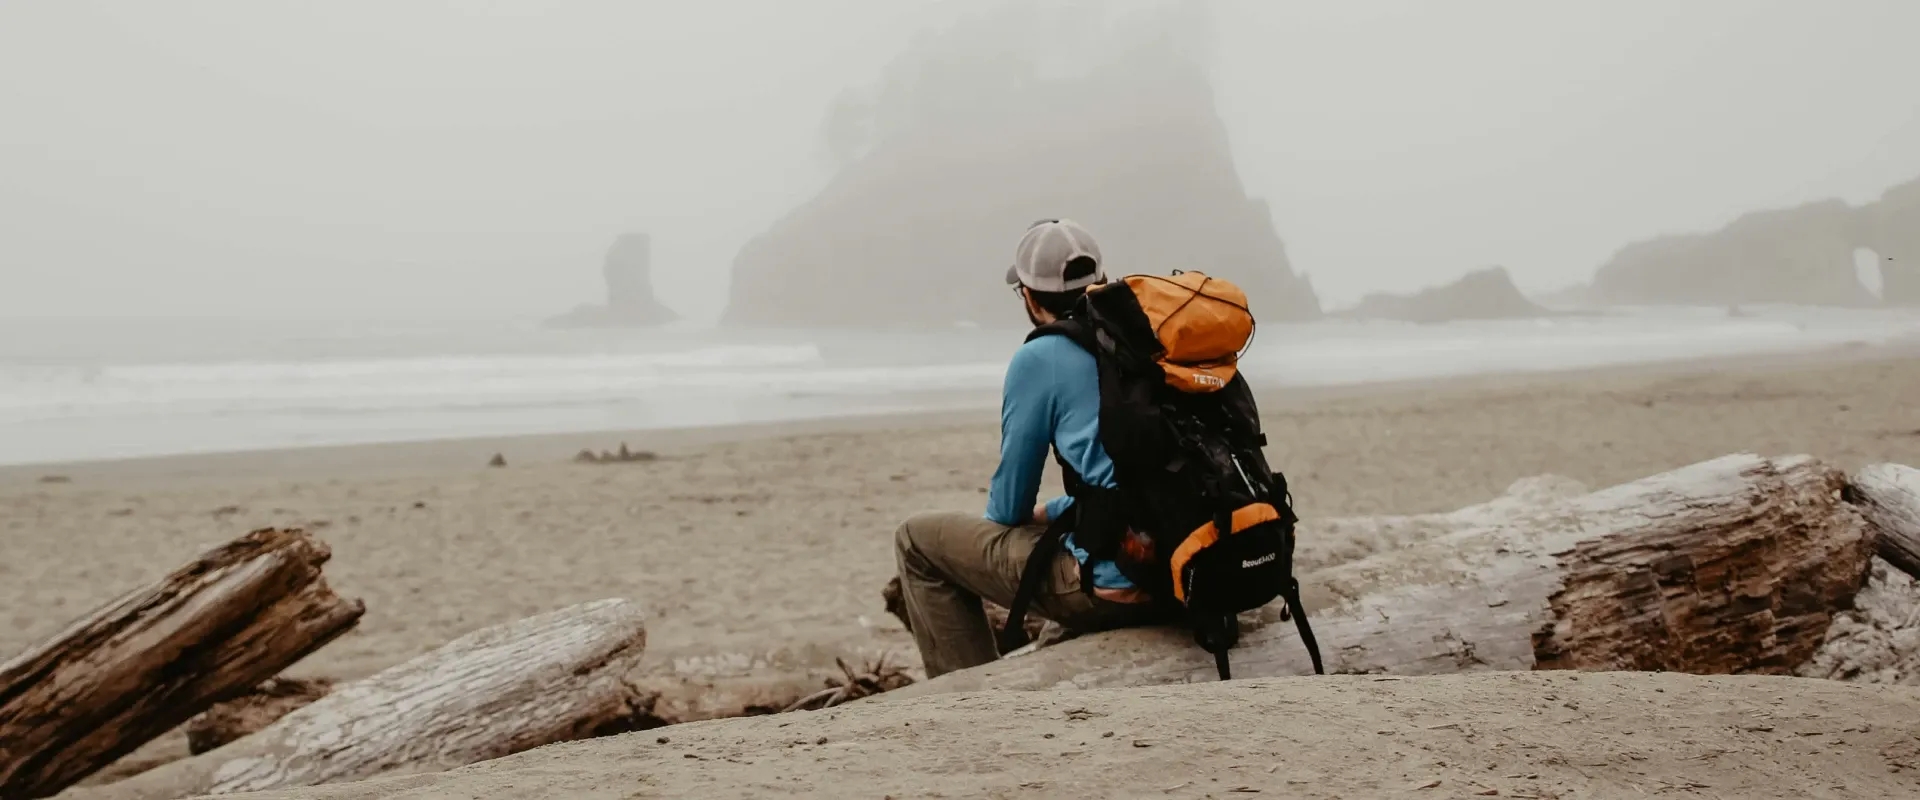 A man sits with a backpack on looking at the ocean from a log on the beach